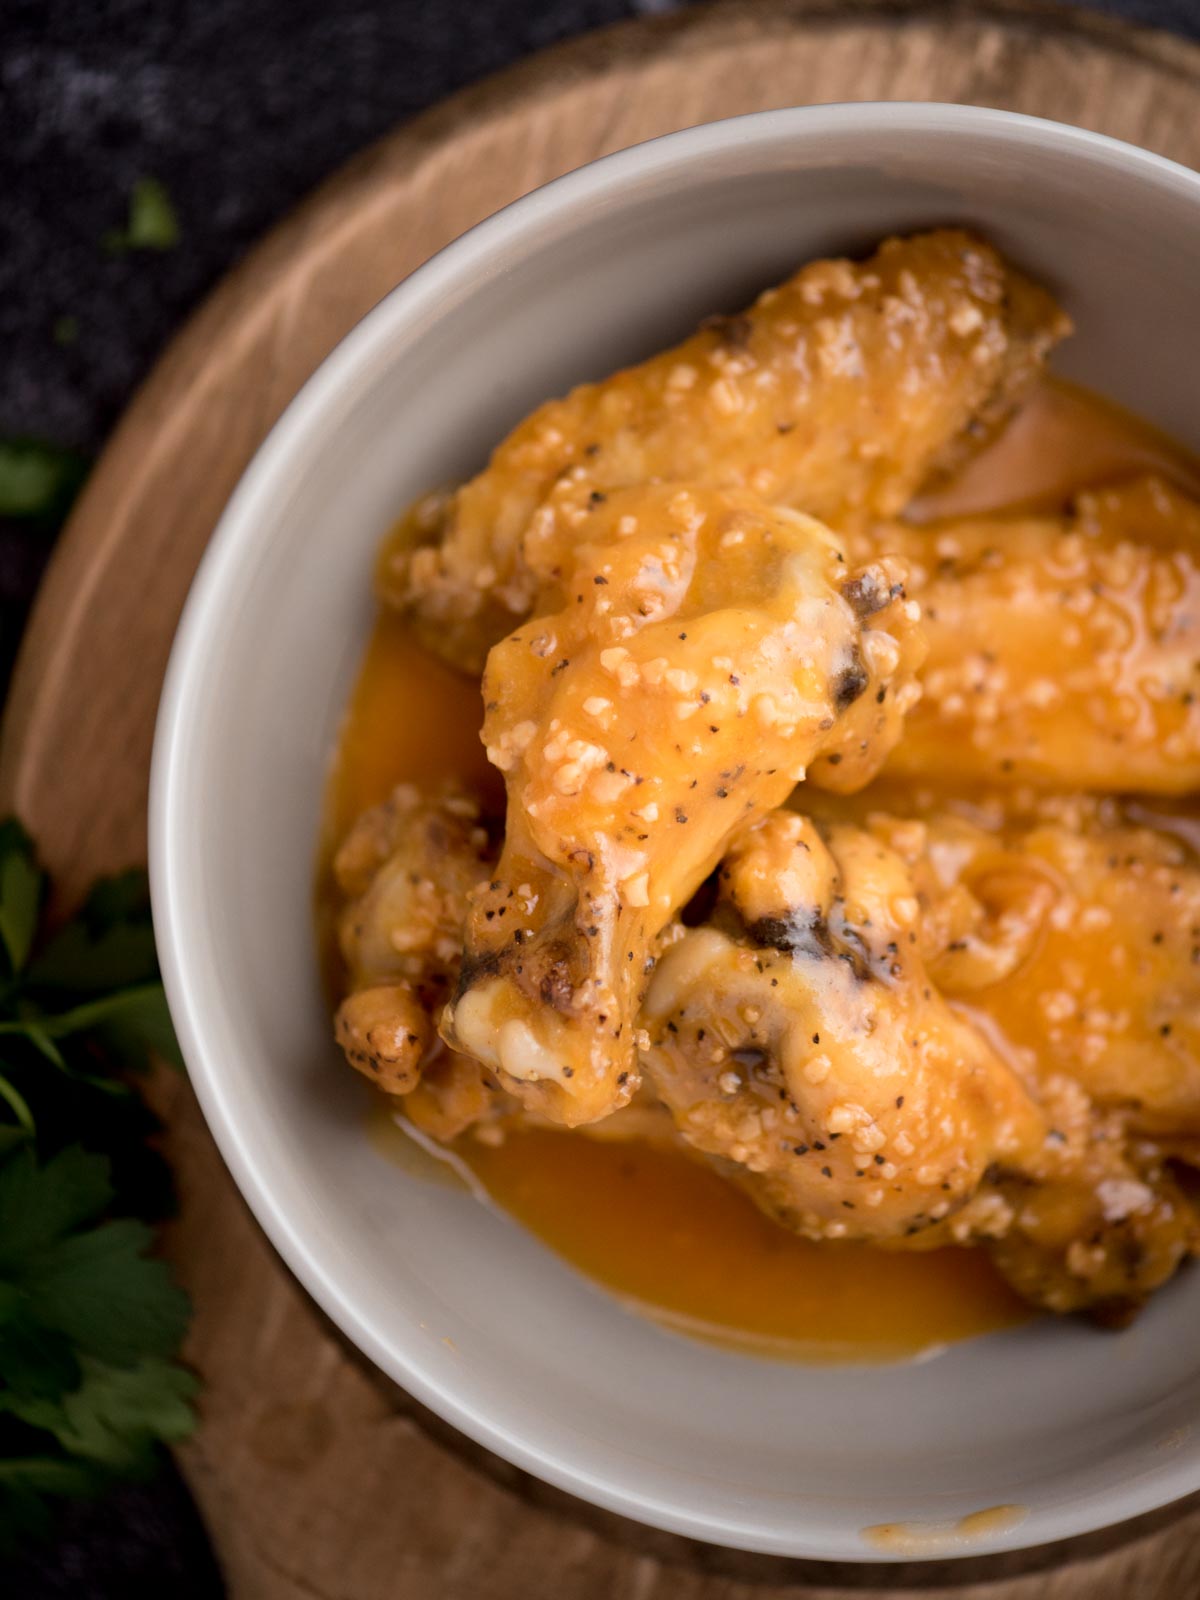 garlic butter wings coated in a sauce in a bowl